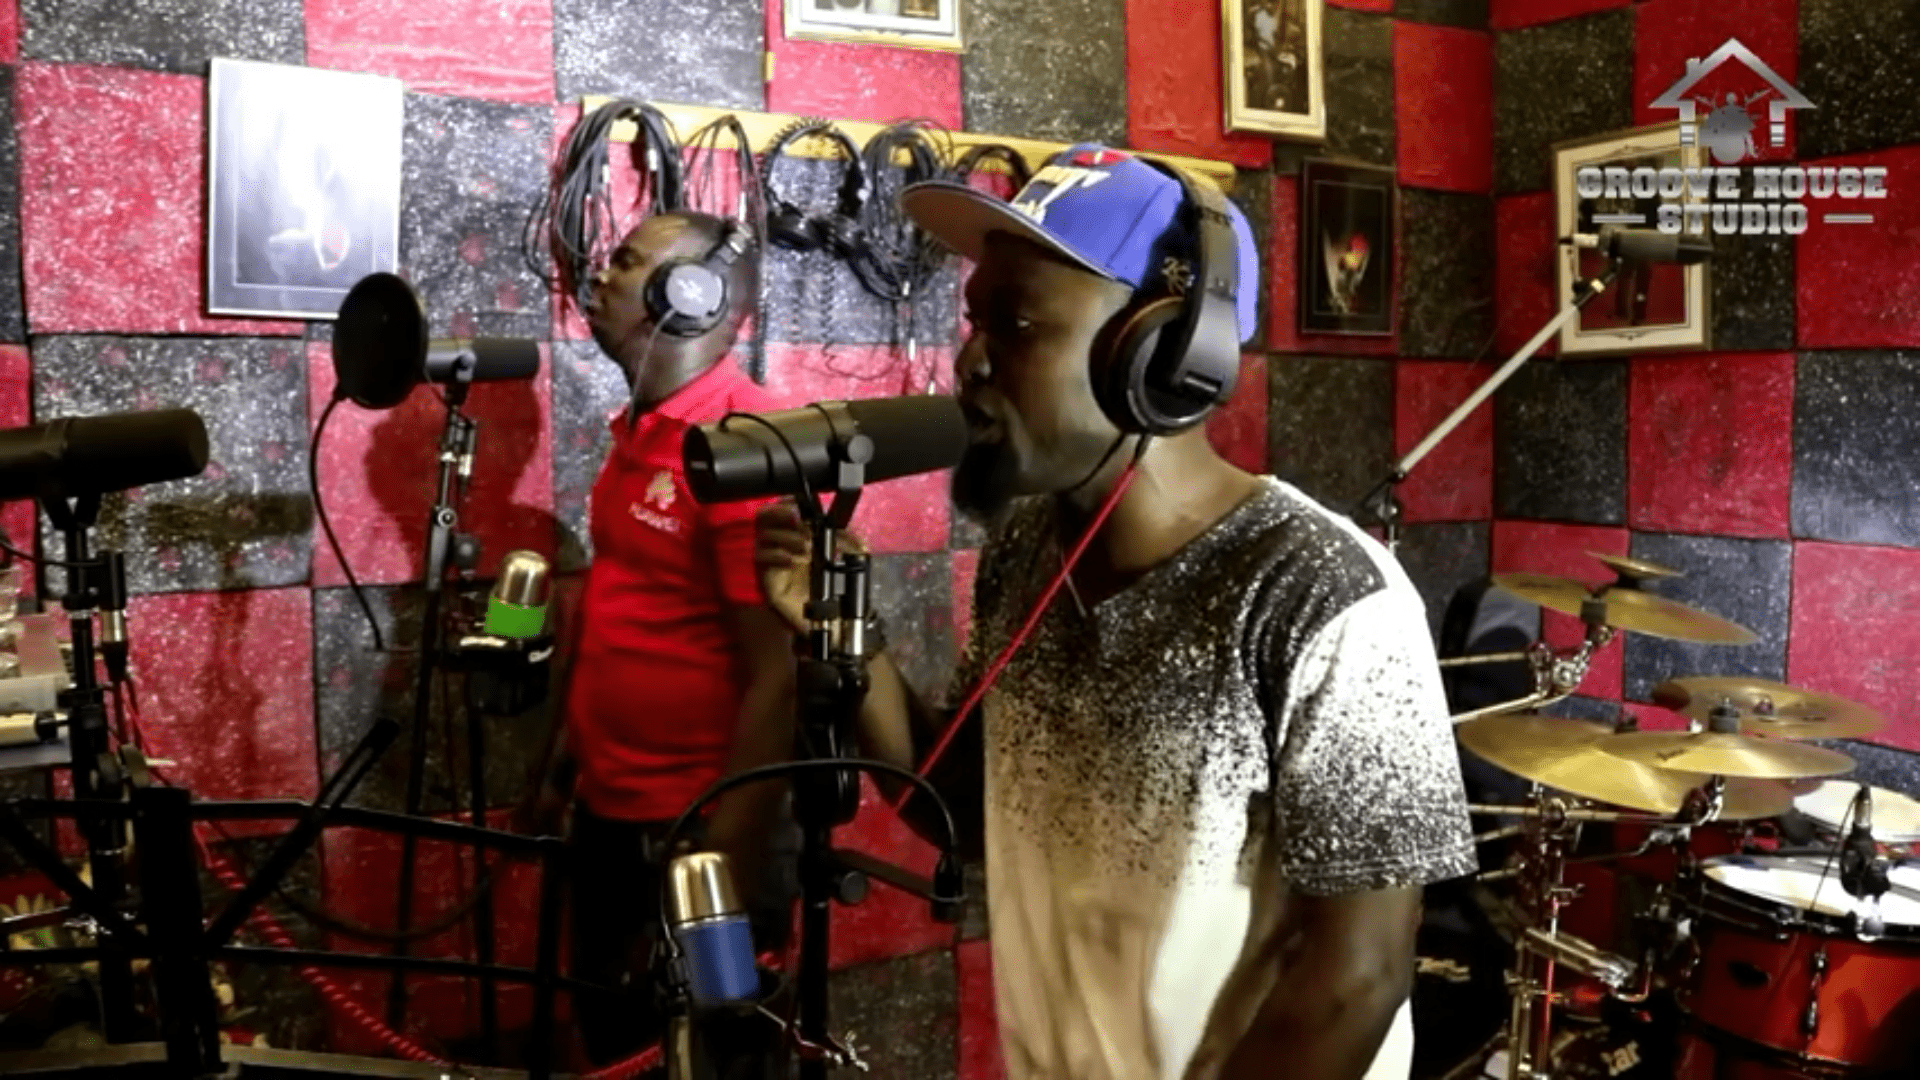 Iyk Wonder Covers P Spquare’s “Bring It On” live.